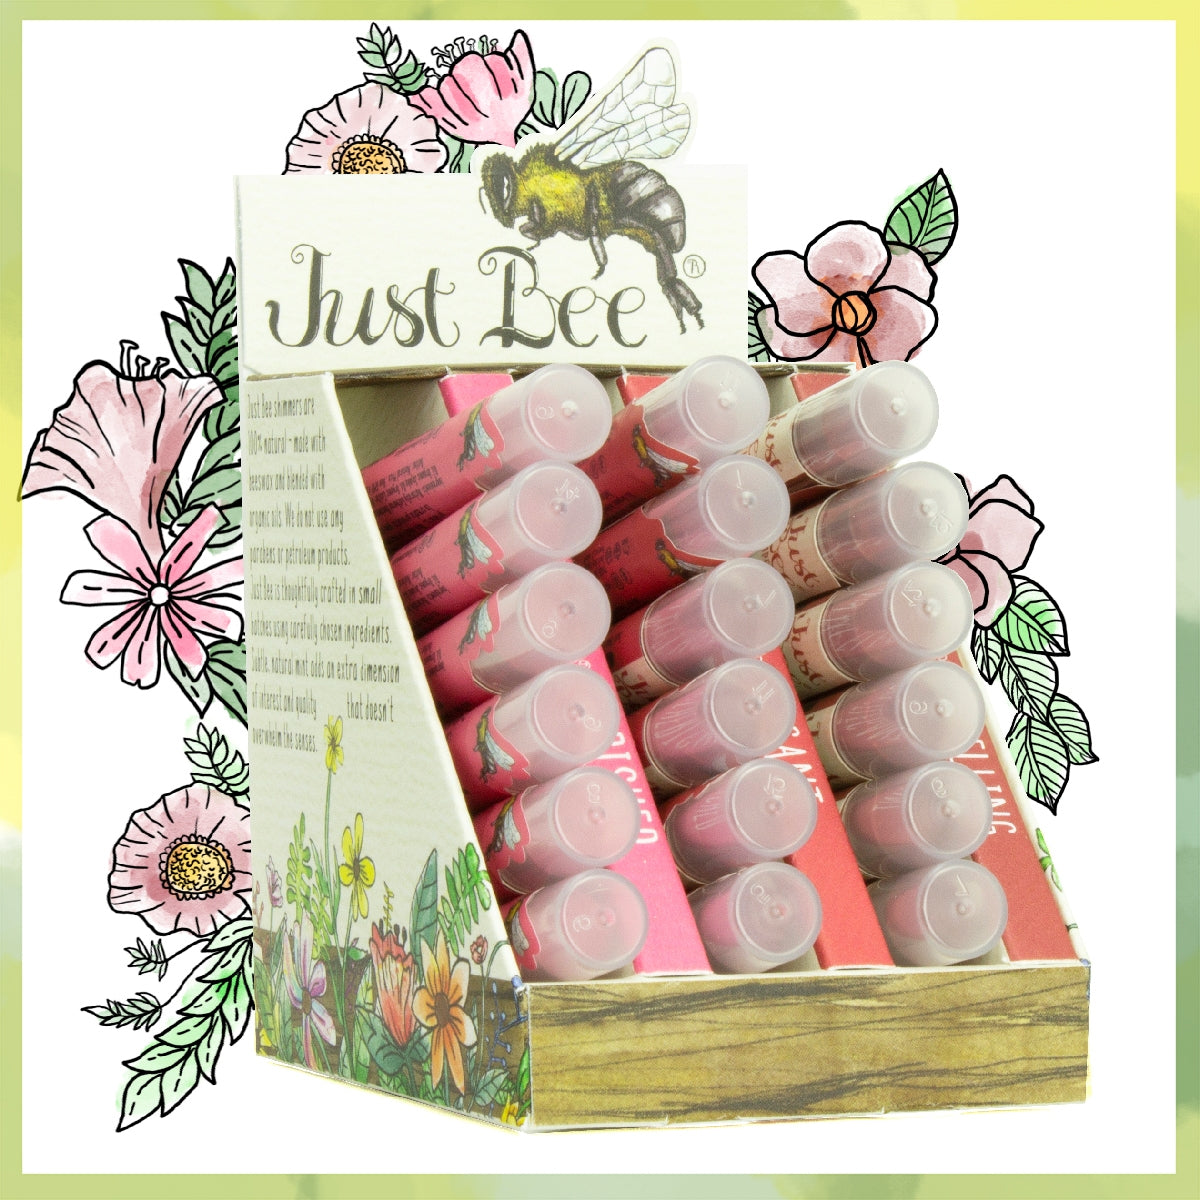 Just Bee Shimmer Balms